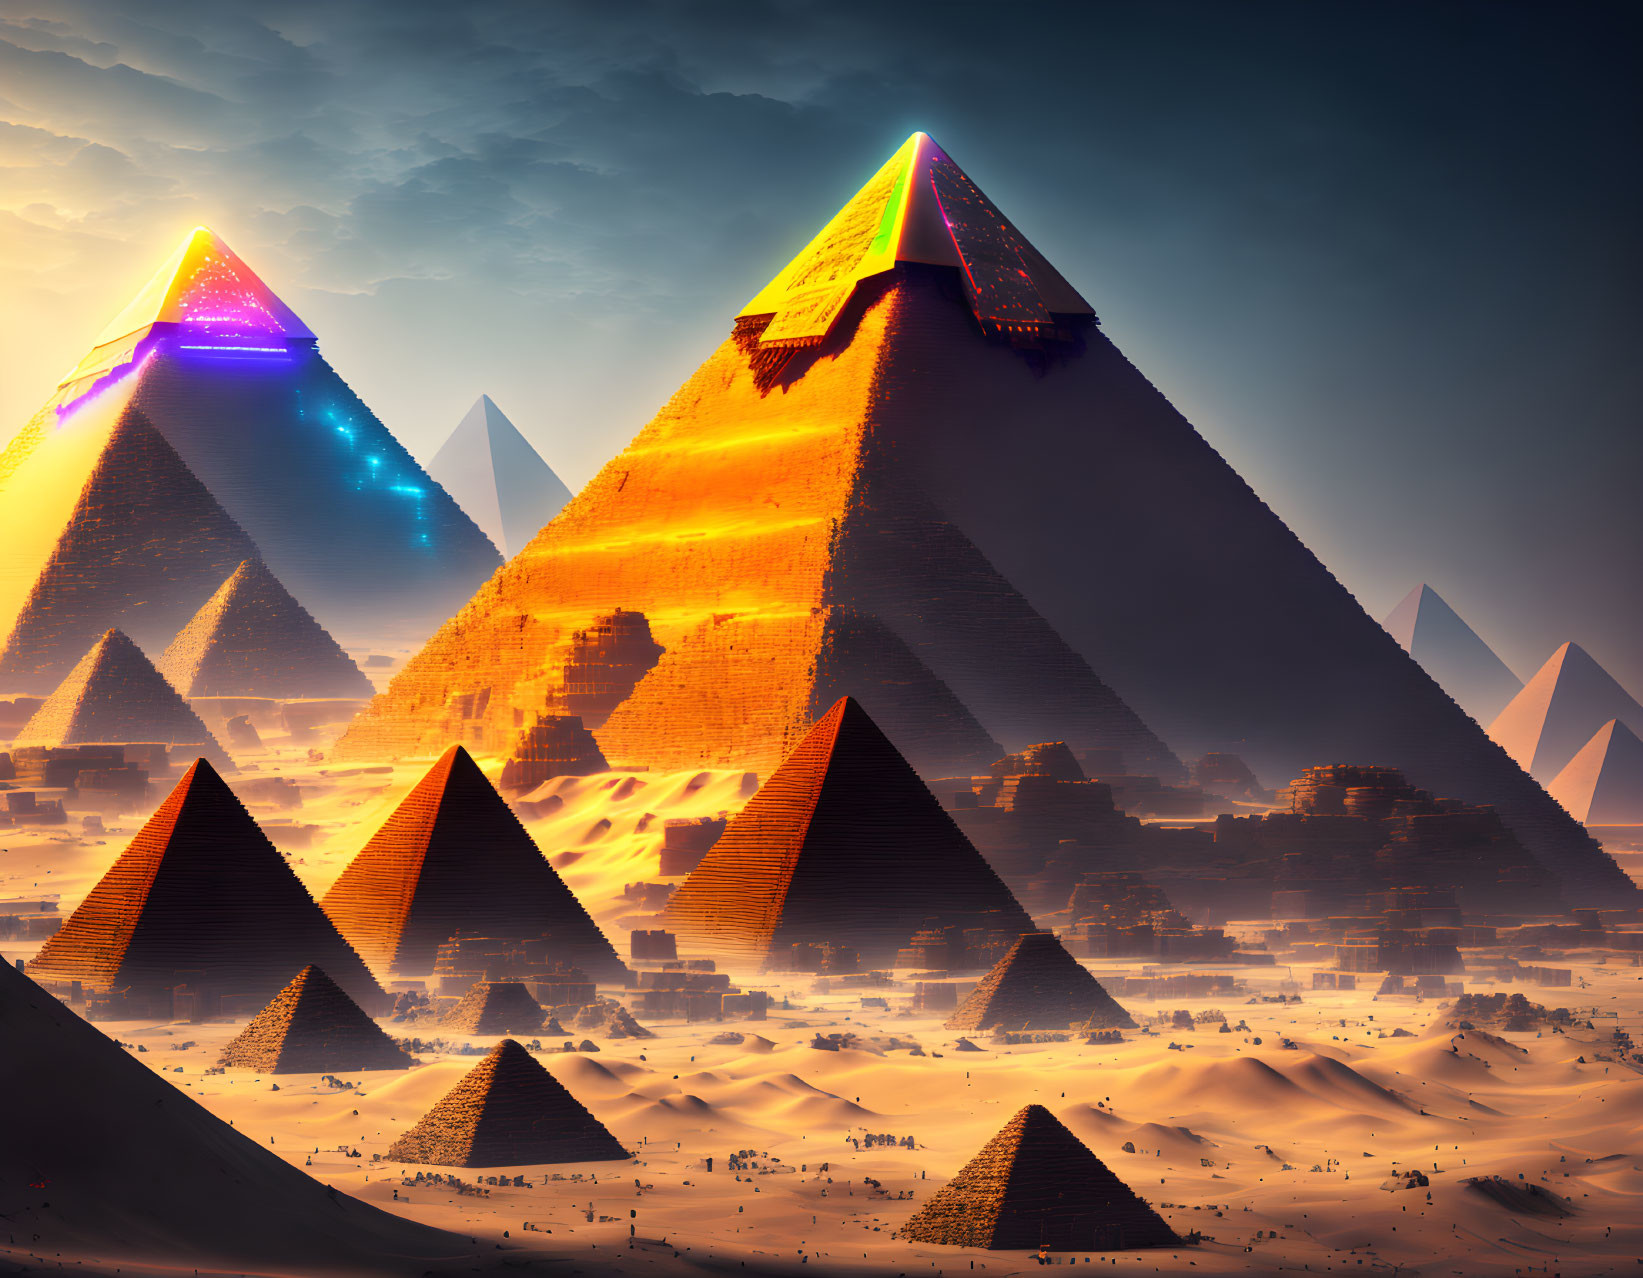 Glowing pyramids in desert landscape at sunset